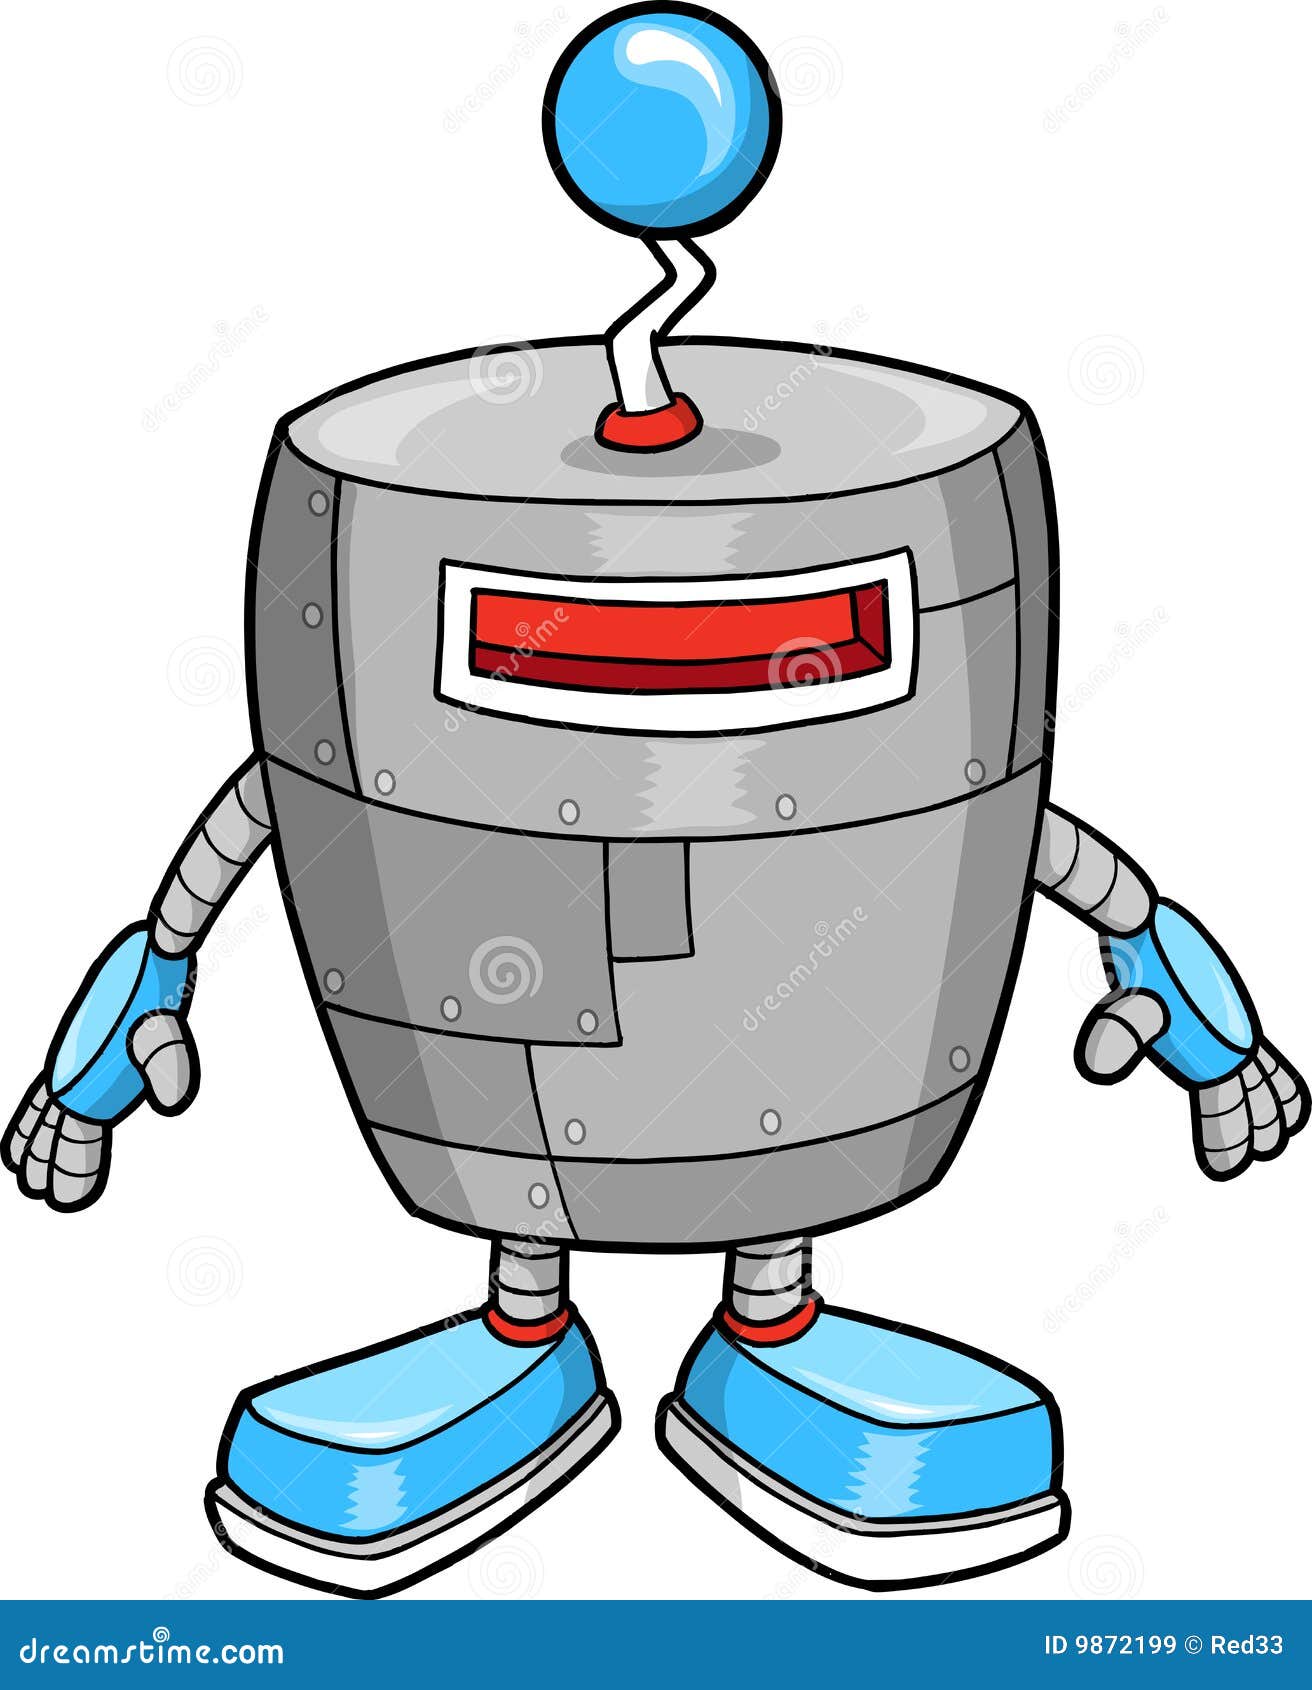 Download Cute Robot Vector Royalty Free Stock Images - Image: 9872199